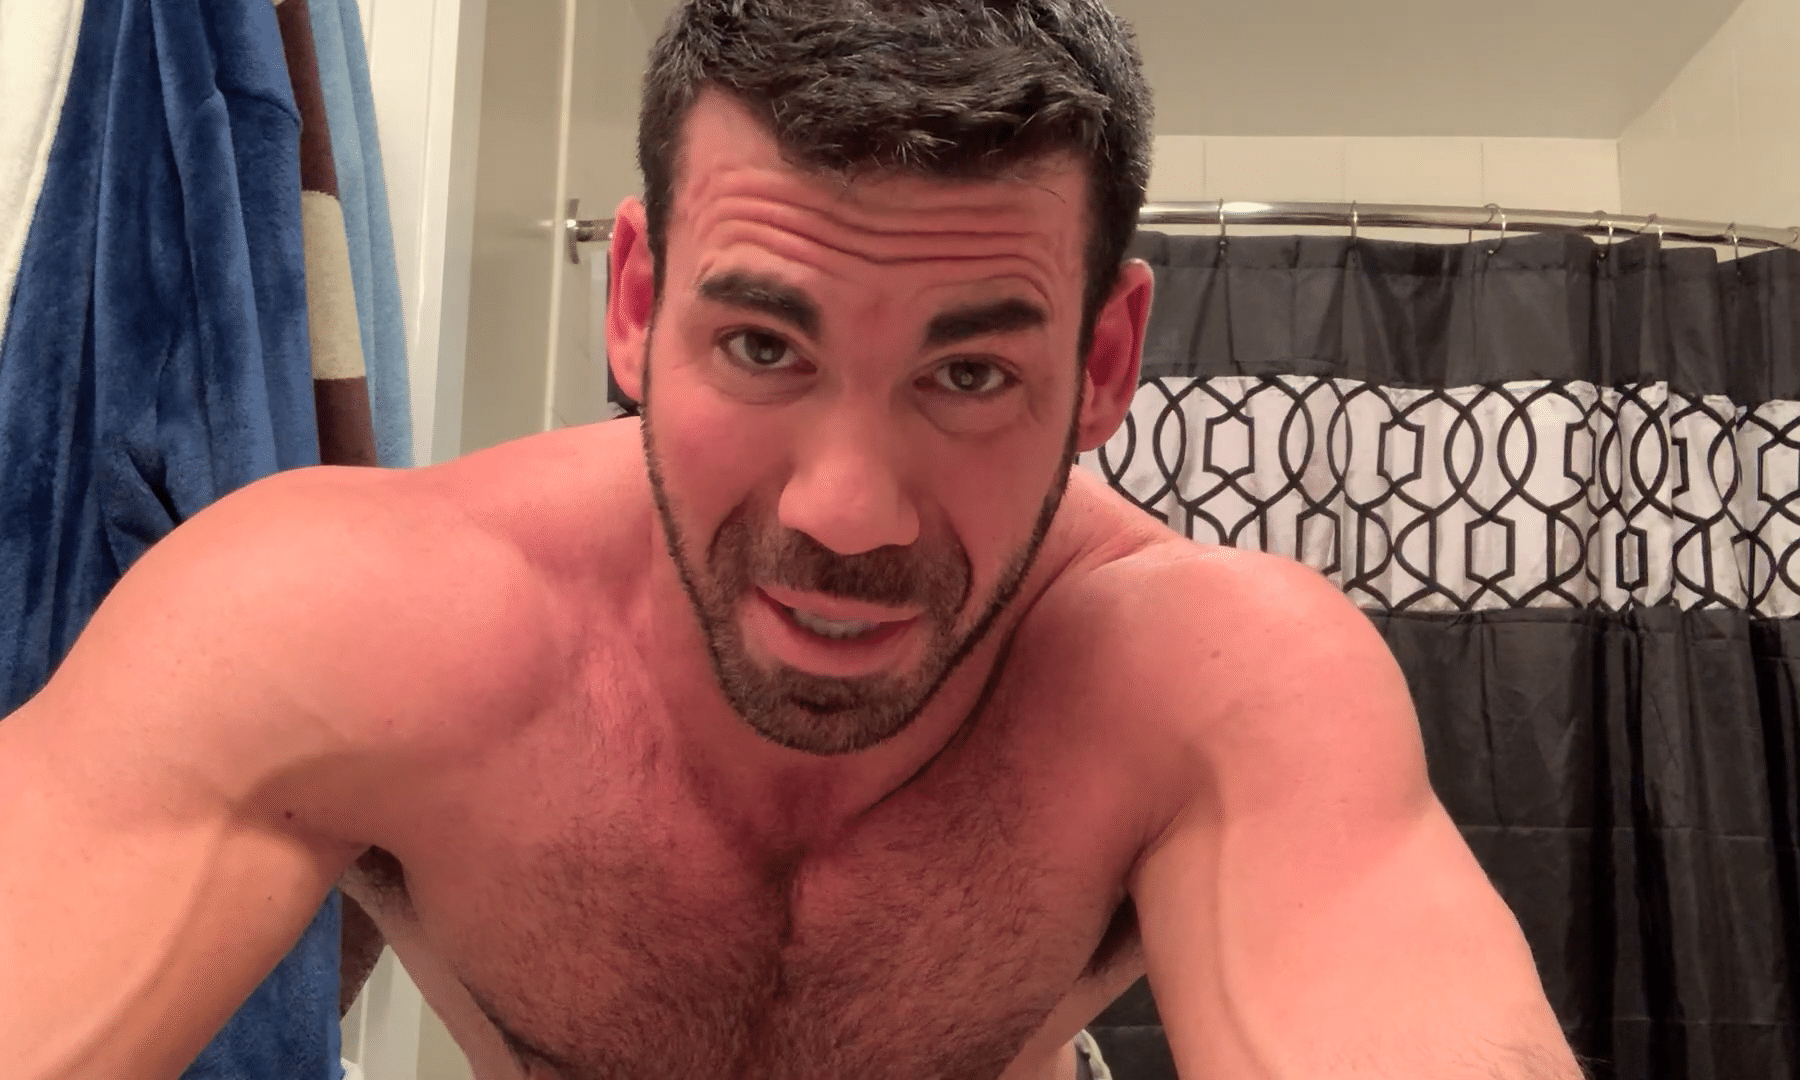 Billy Santoro: Disgraced gay porn star evicted over loud 'meet and greets'